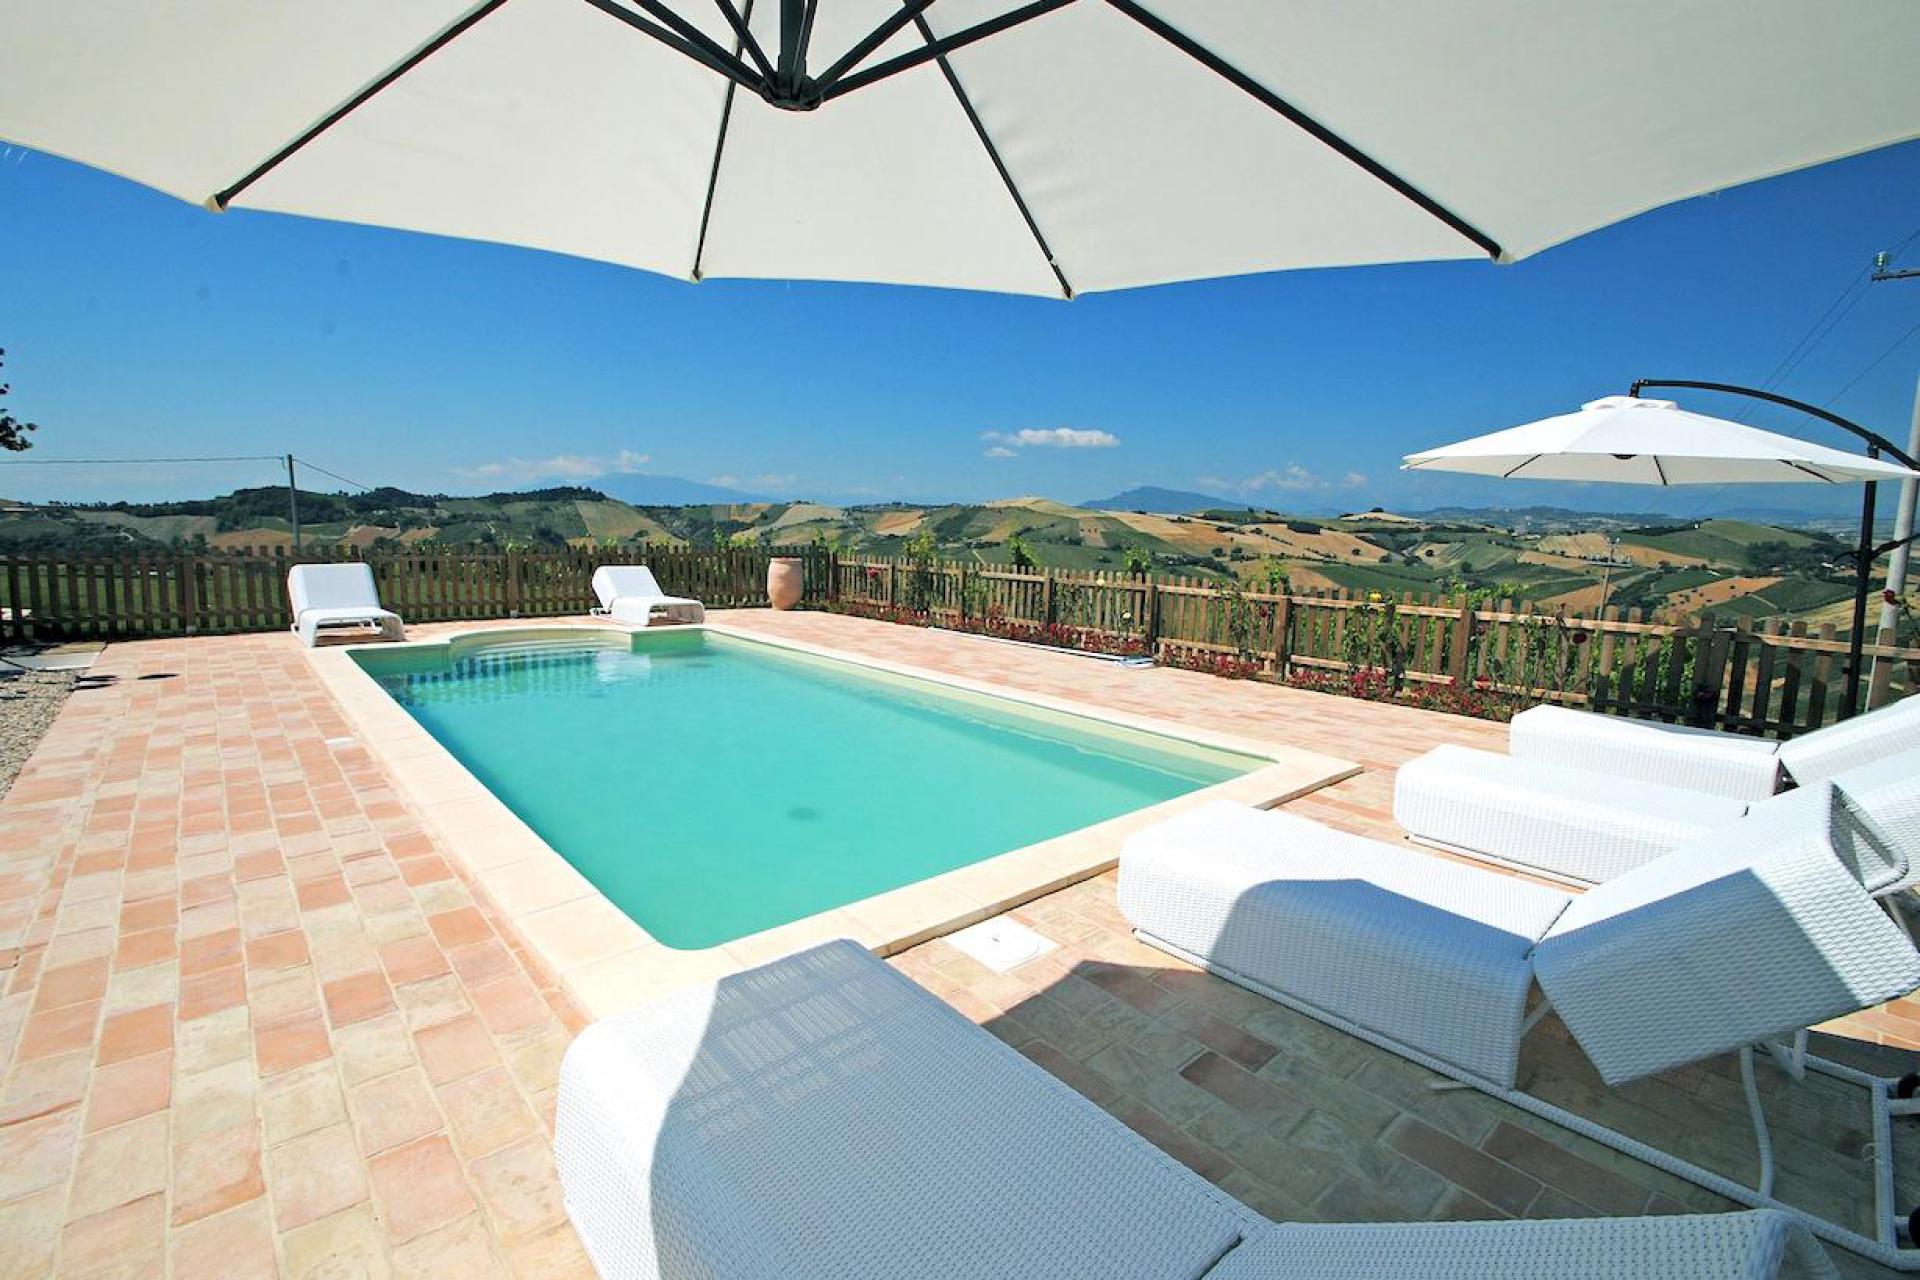 Agriturismo Marche with restaurant and views